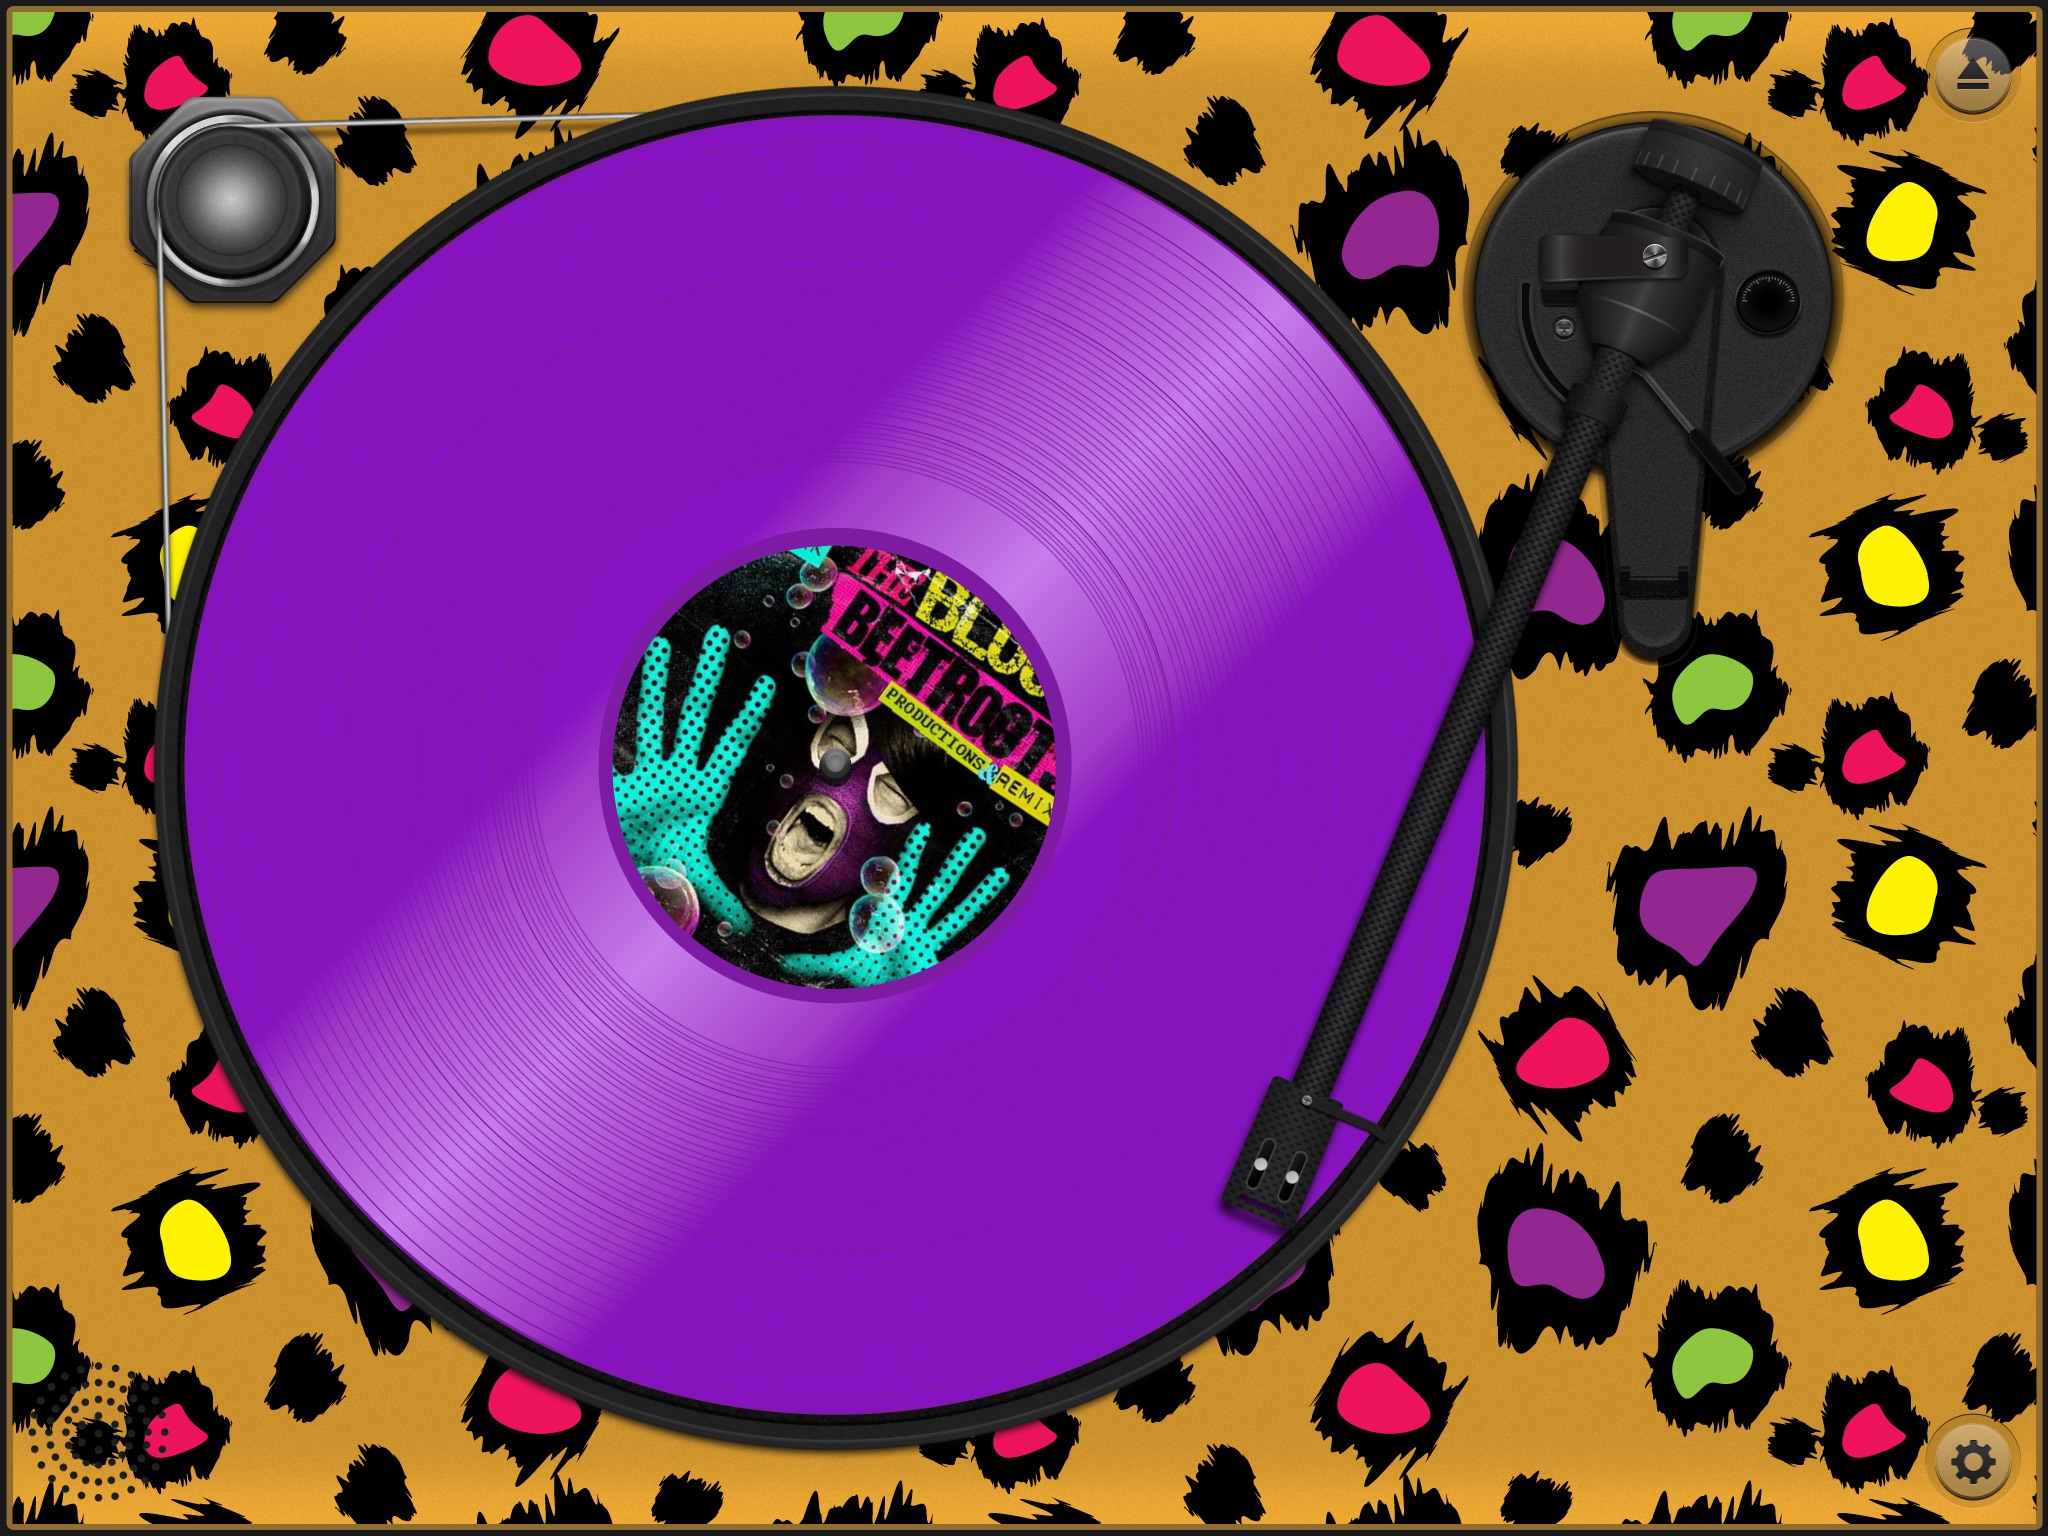 Turntable Limited Edition screenshot 4